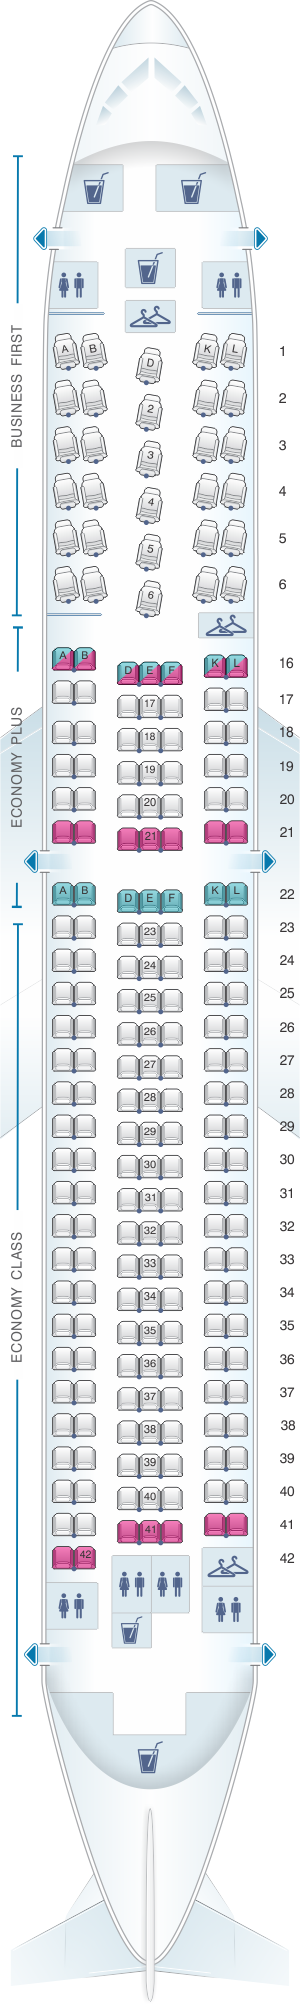 Seat map for United Airlines Boeing B767 300ER - version 2